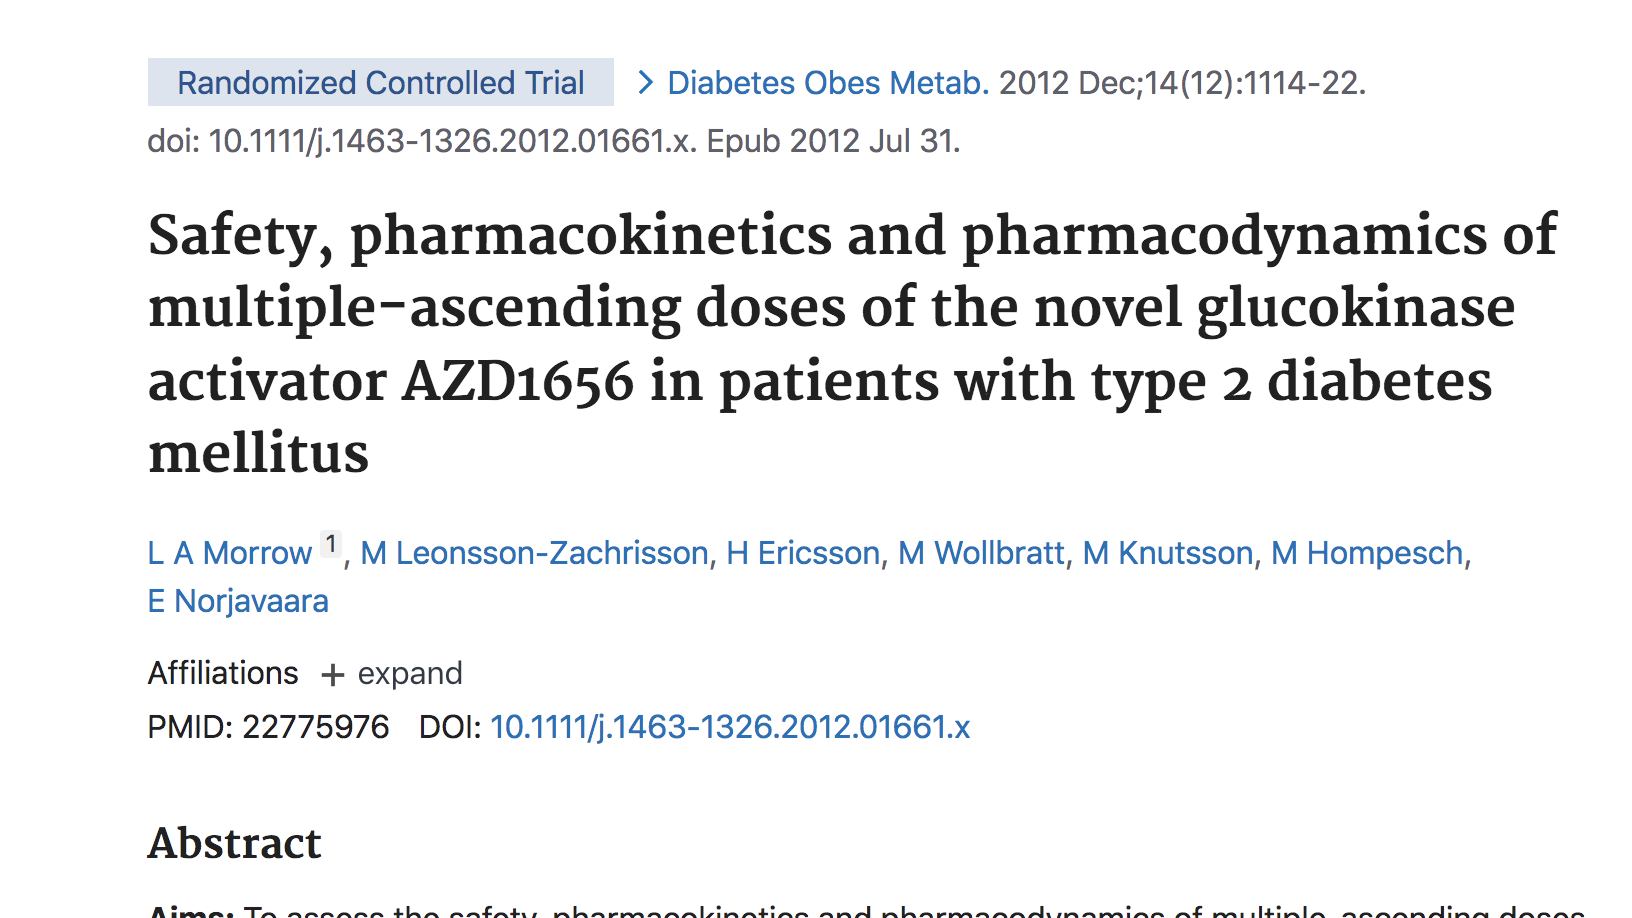 image of Safety, pharmacokinetics and pharmacodynamics of multiple-ascending doses of the novel glucokinase activator AZD1656 in patients with type 2 diabetes mellitus